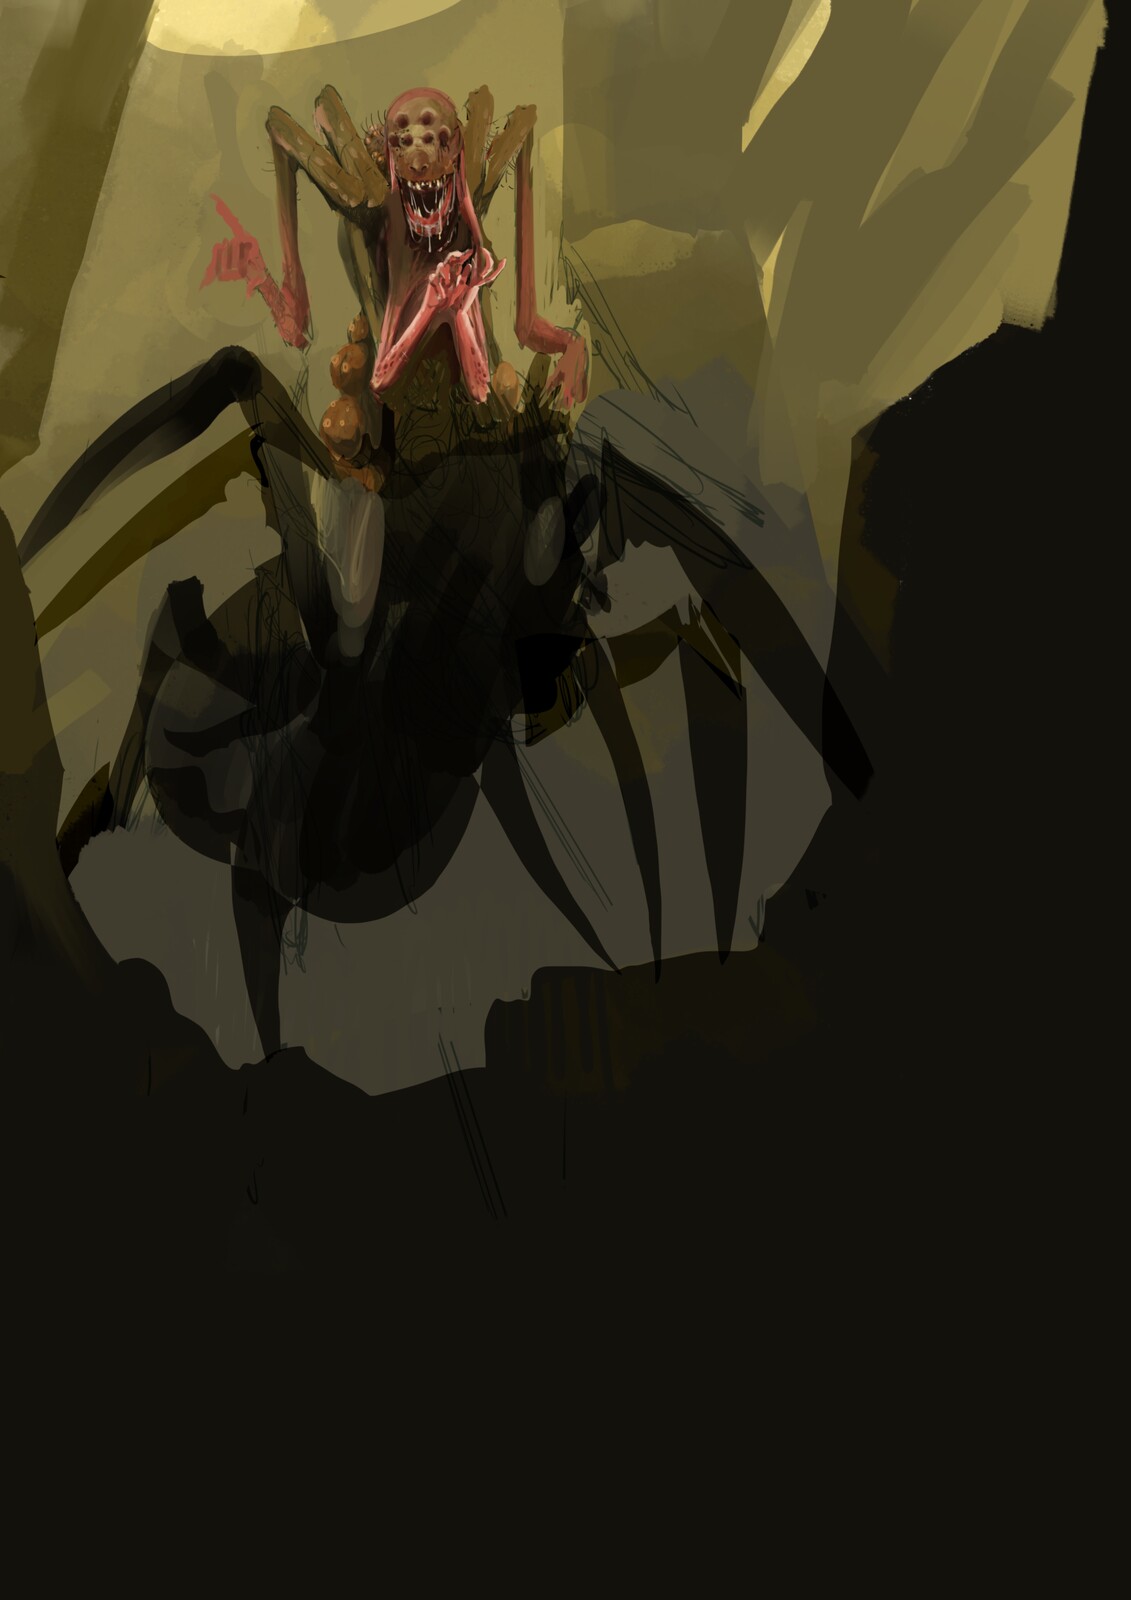 The brood mother Hag that oversees the spider goblins, with her spider mount.